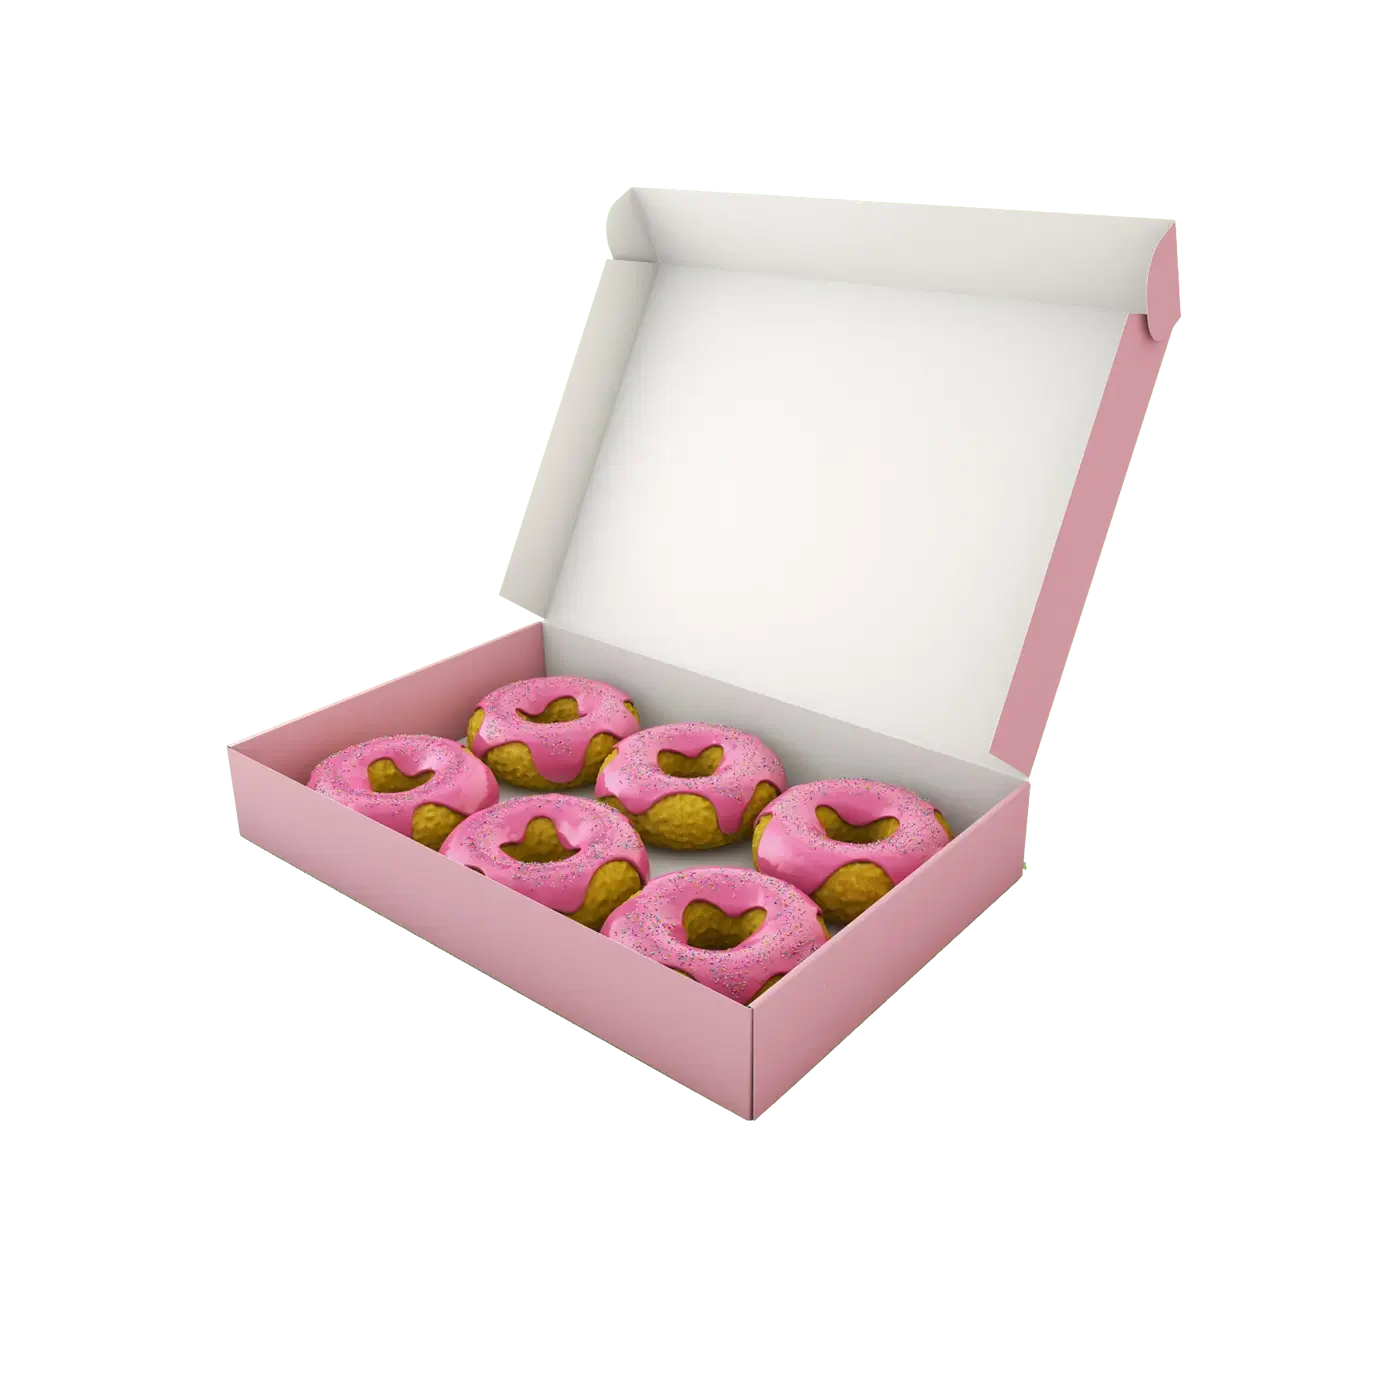 Custom Food Mailer Box Folding Cartons Pink Color Outside White Color Inside Open View Donuts Box Inspiration by qualitycustomboxes.com